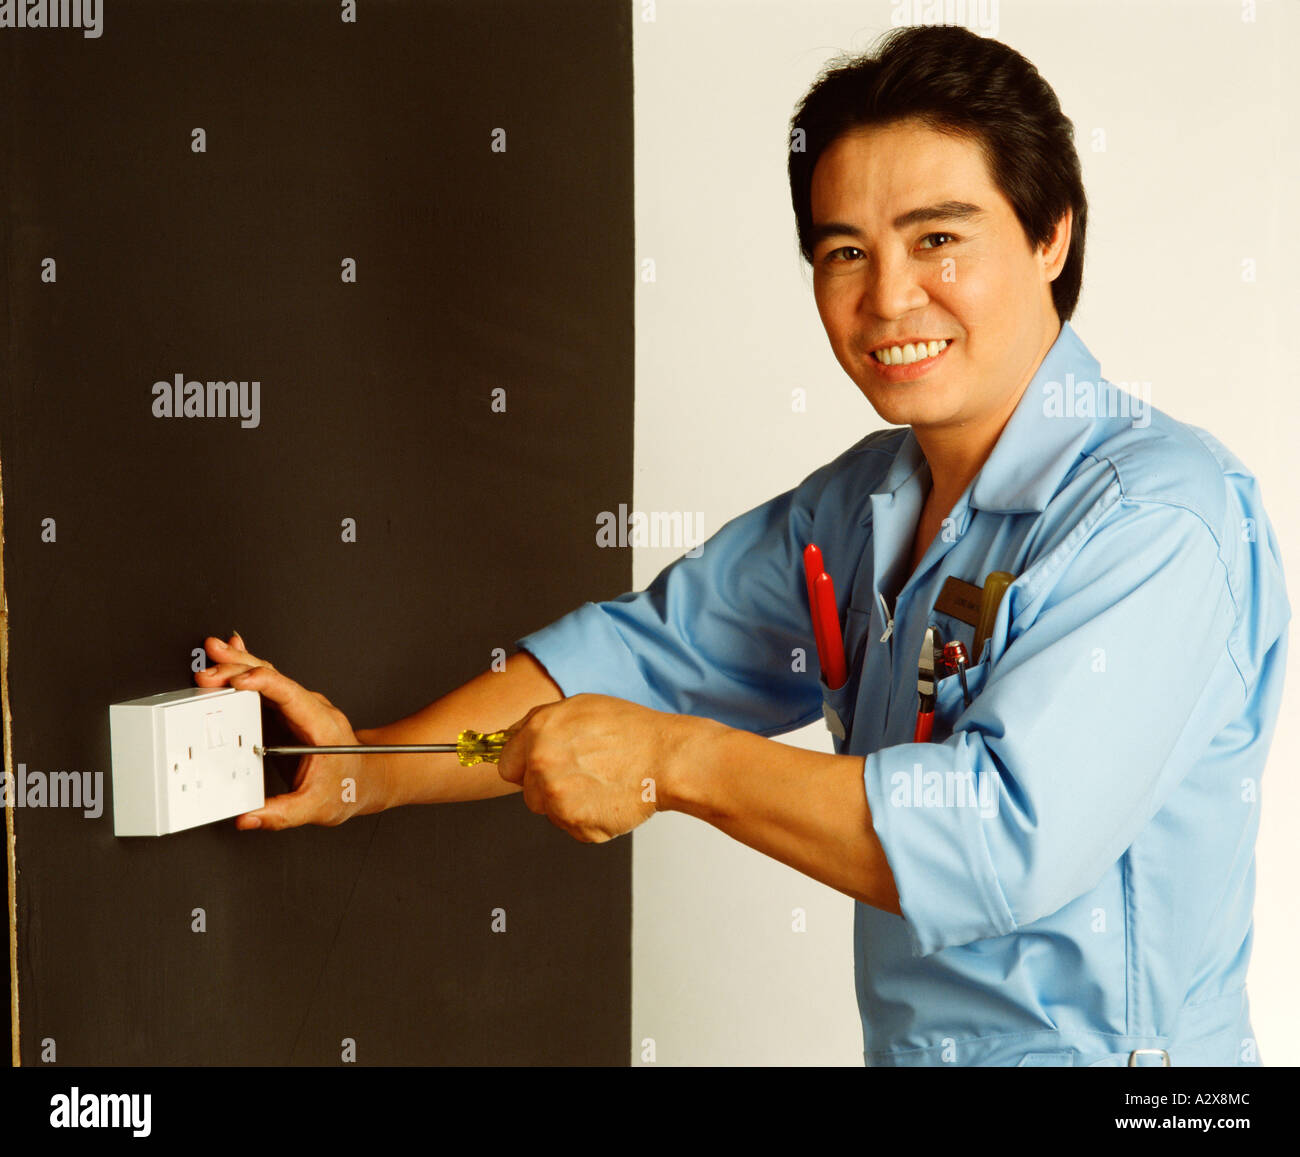 Chinese tradesman electrician demonstrating fitting electrical socket high wall placement. Stock Photo